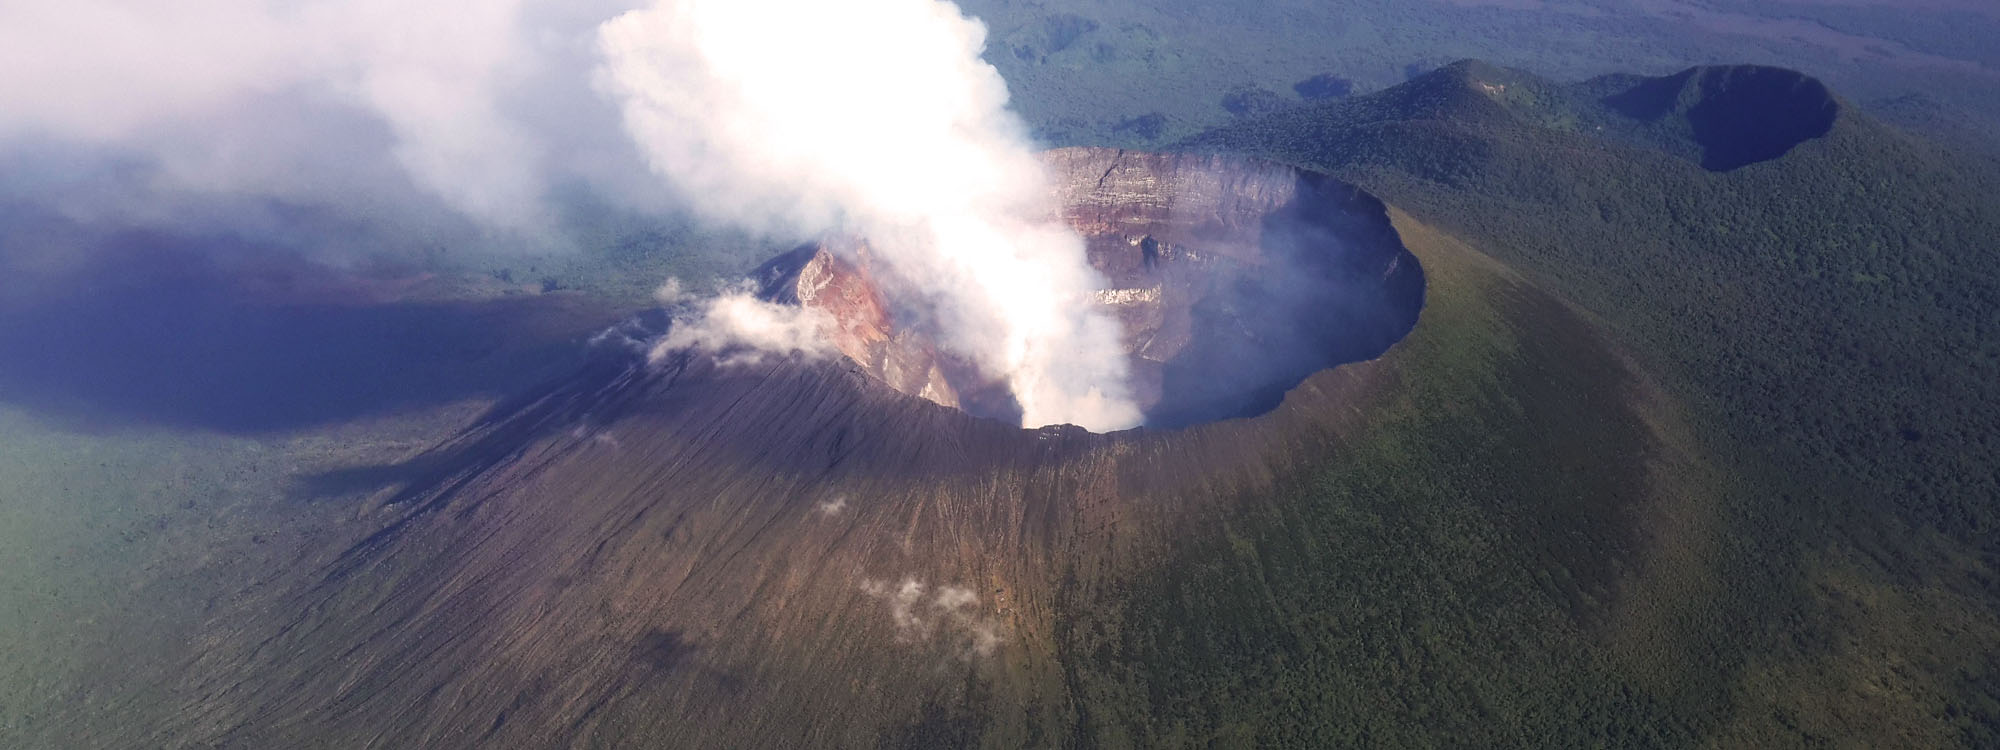 Mount Nyiragongo: The Aftermath of a Volcanic Eruption - ShelterBox Canada